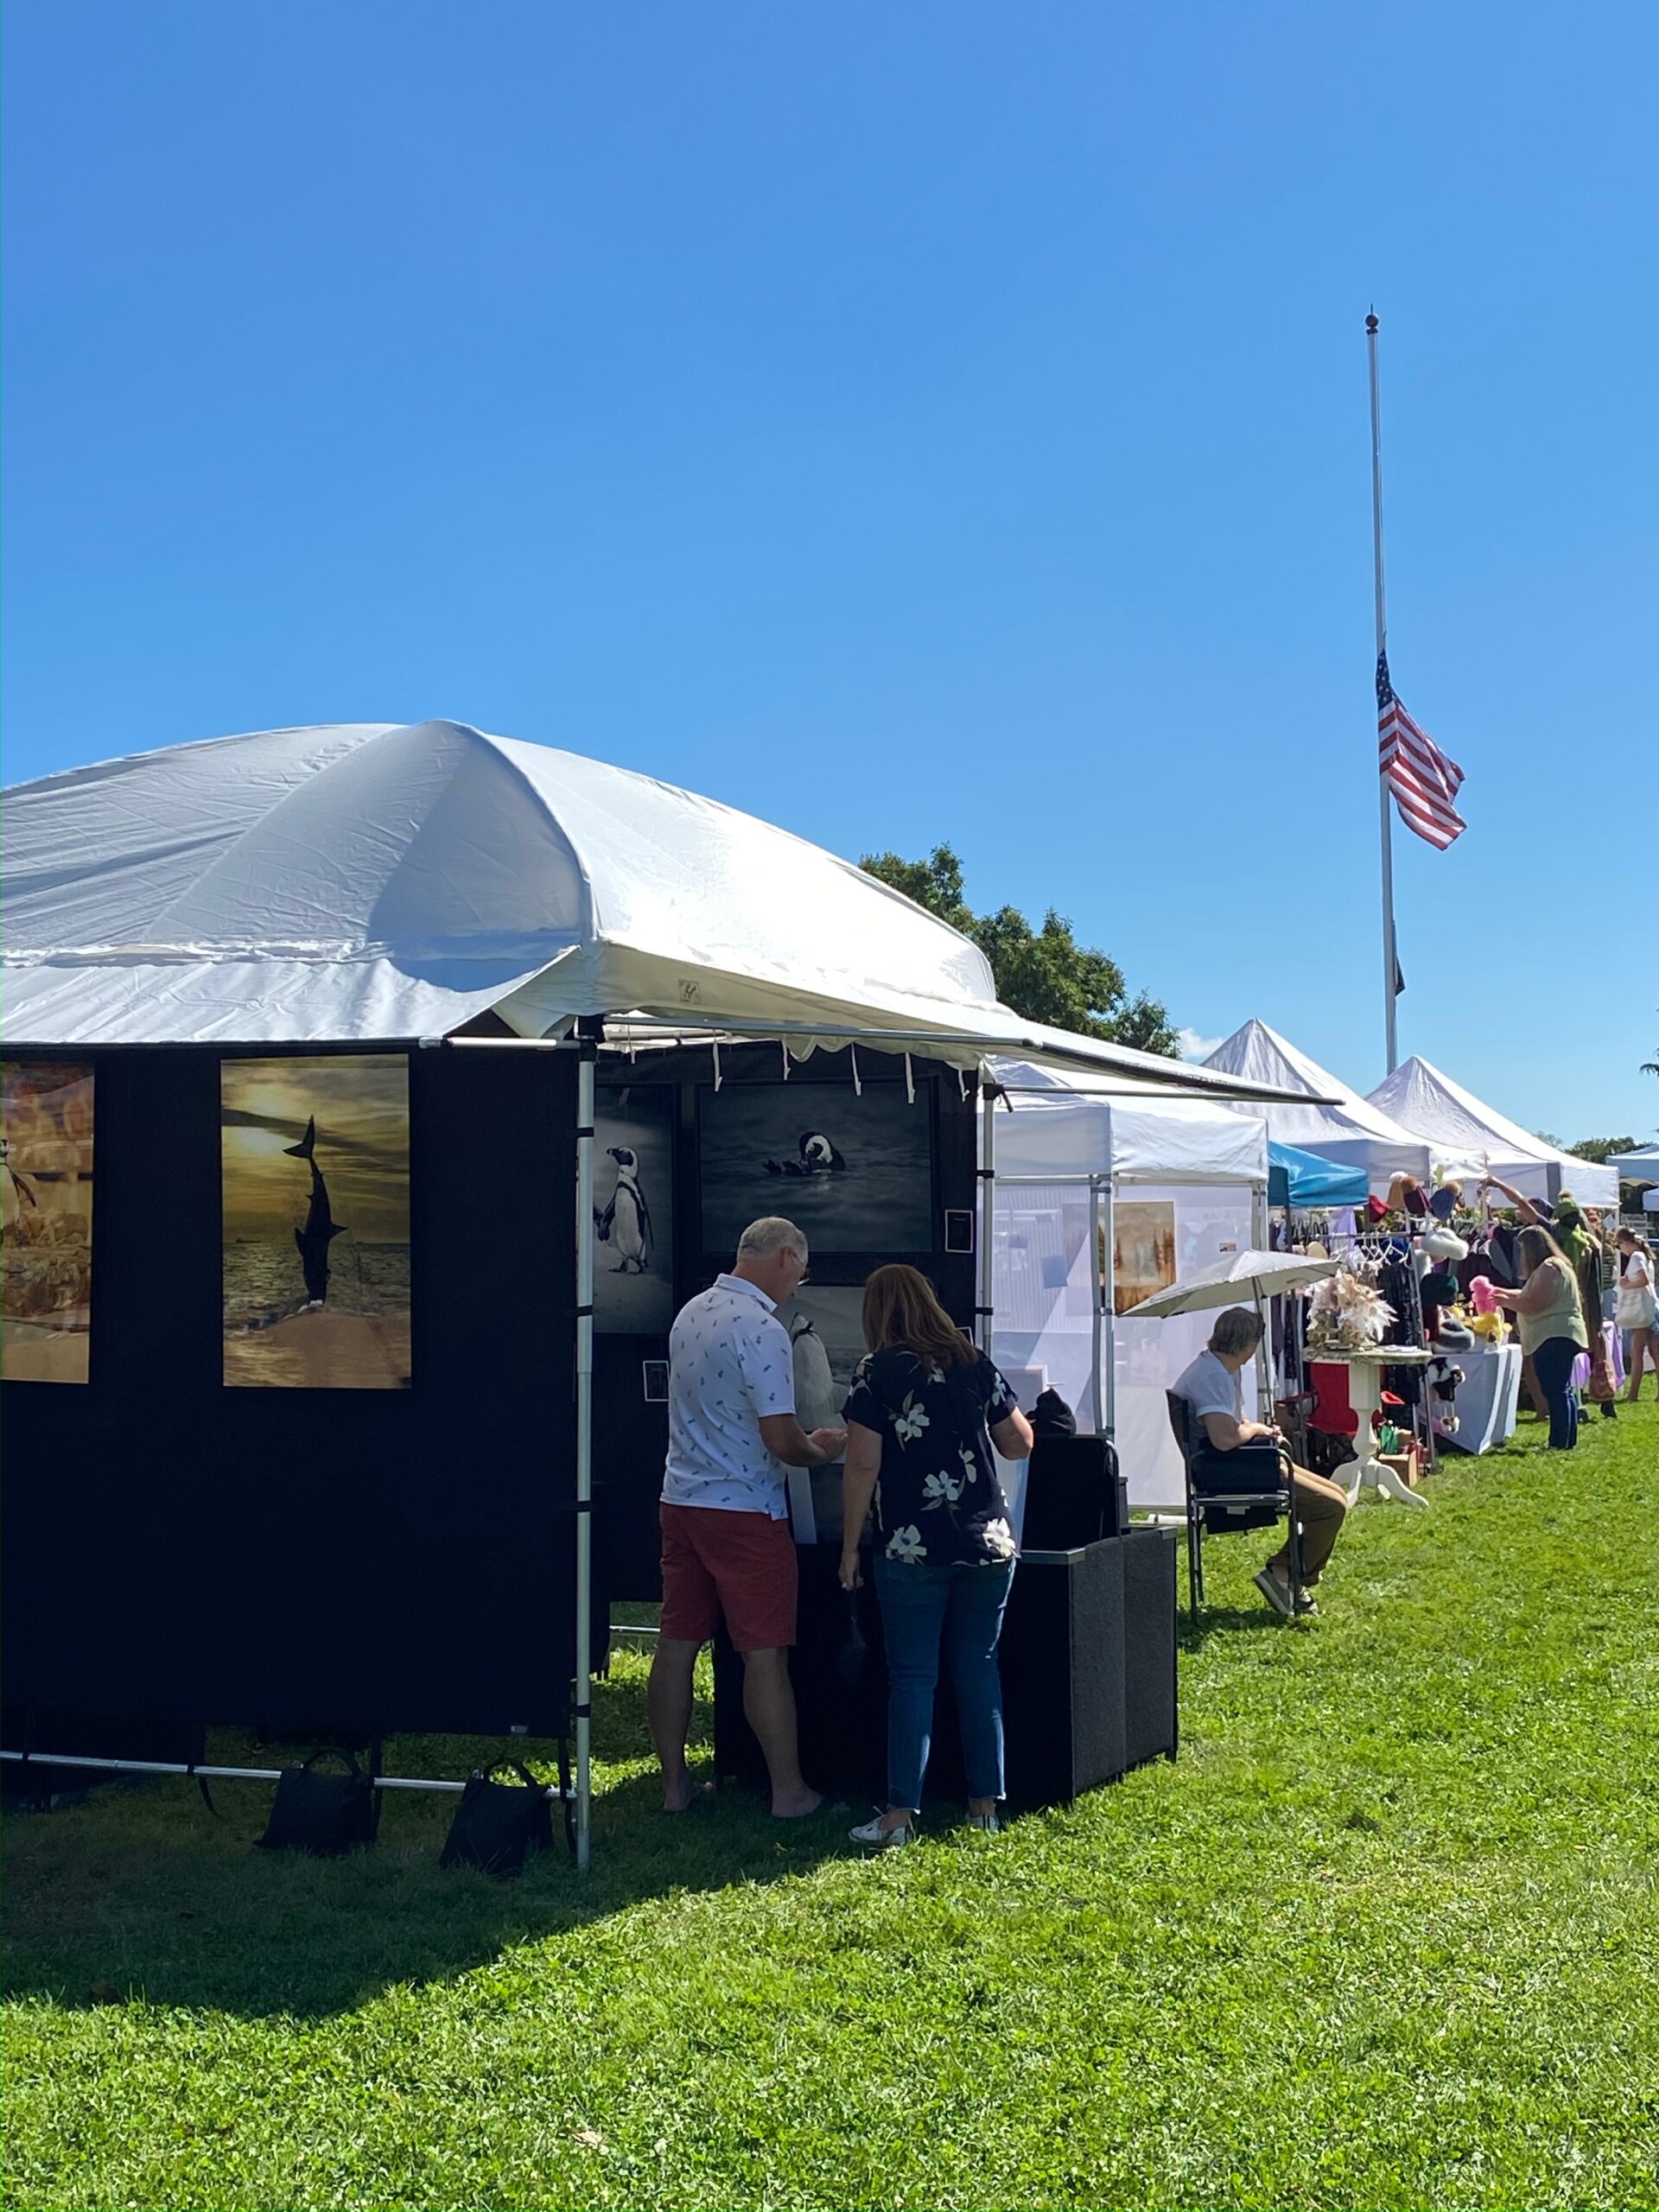 The Sag Harbor Chamber of Commerce  annual Father’s Day Arts & Crafts Fair will be held in Marine Park on Bay Street on Saturday and Sunday, June 18 and 19.